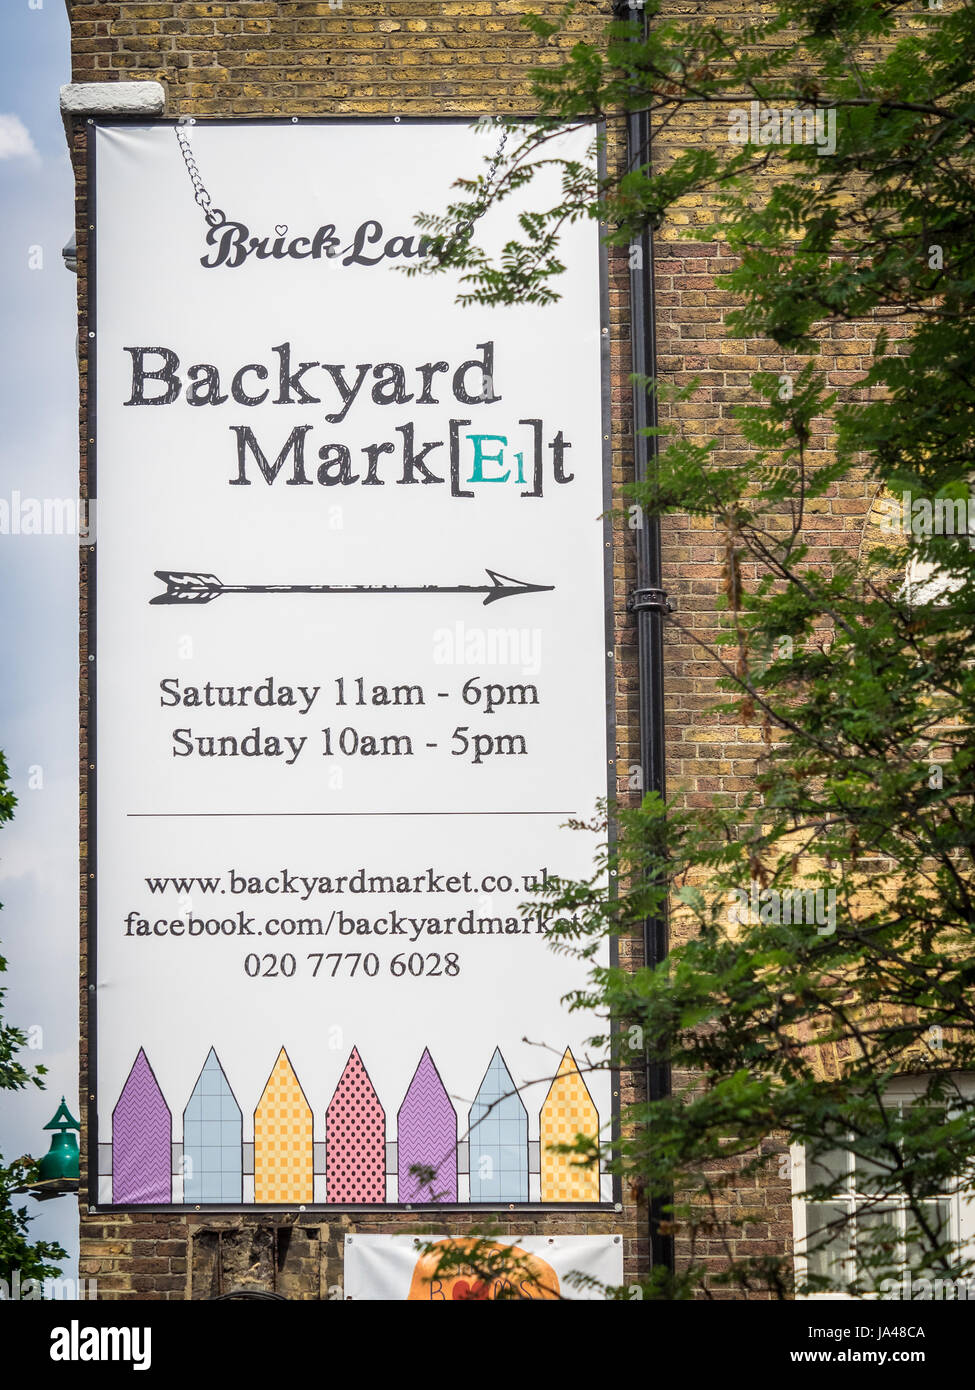 Sign to the Backyard Market off London's popular Brick Lane. The market is open on weekends and popular with tourists and locals alike. Stock Photo